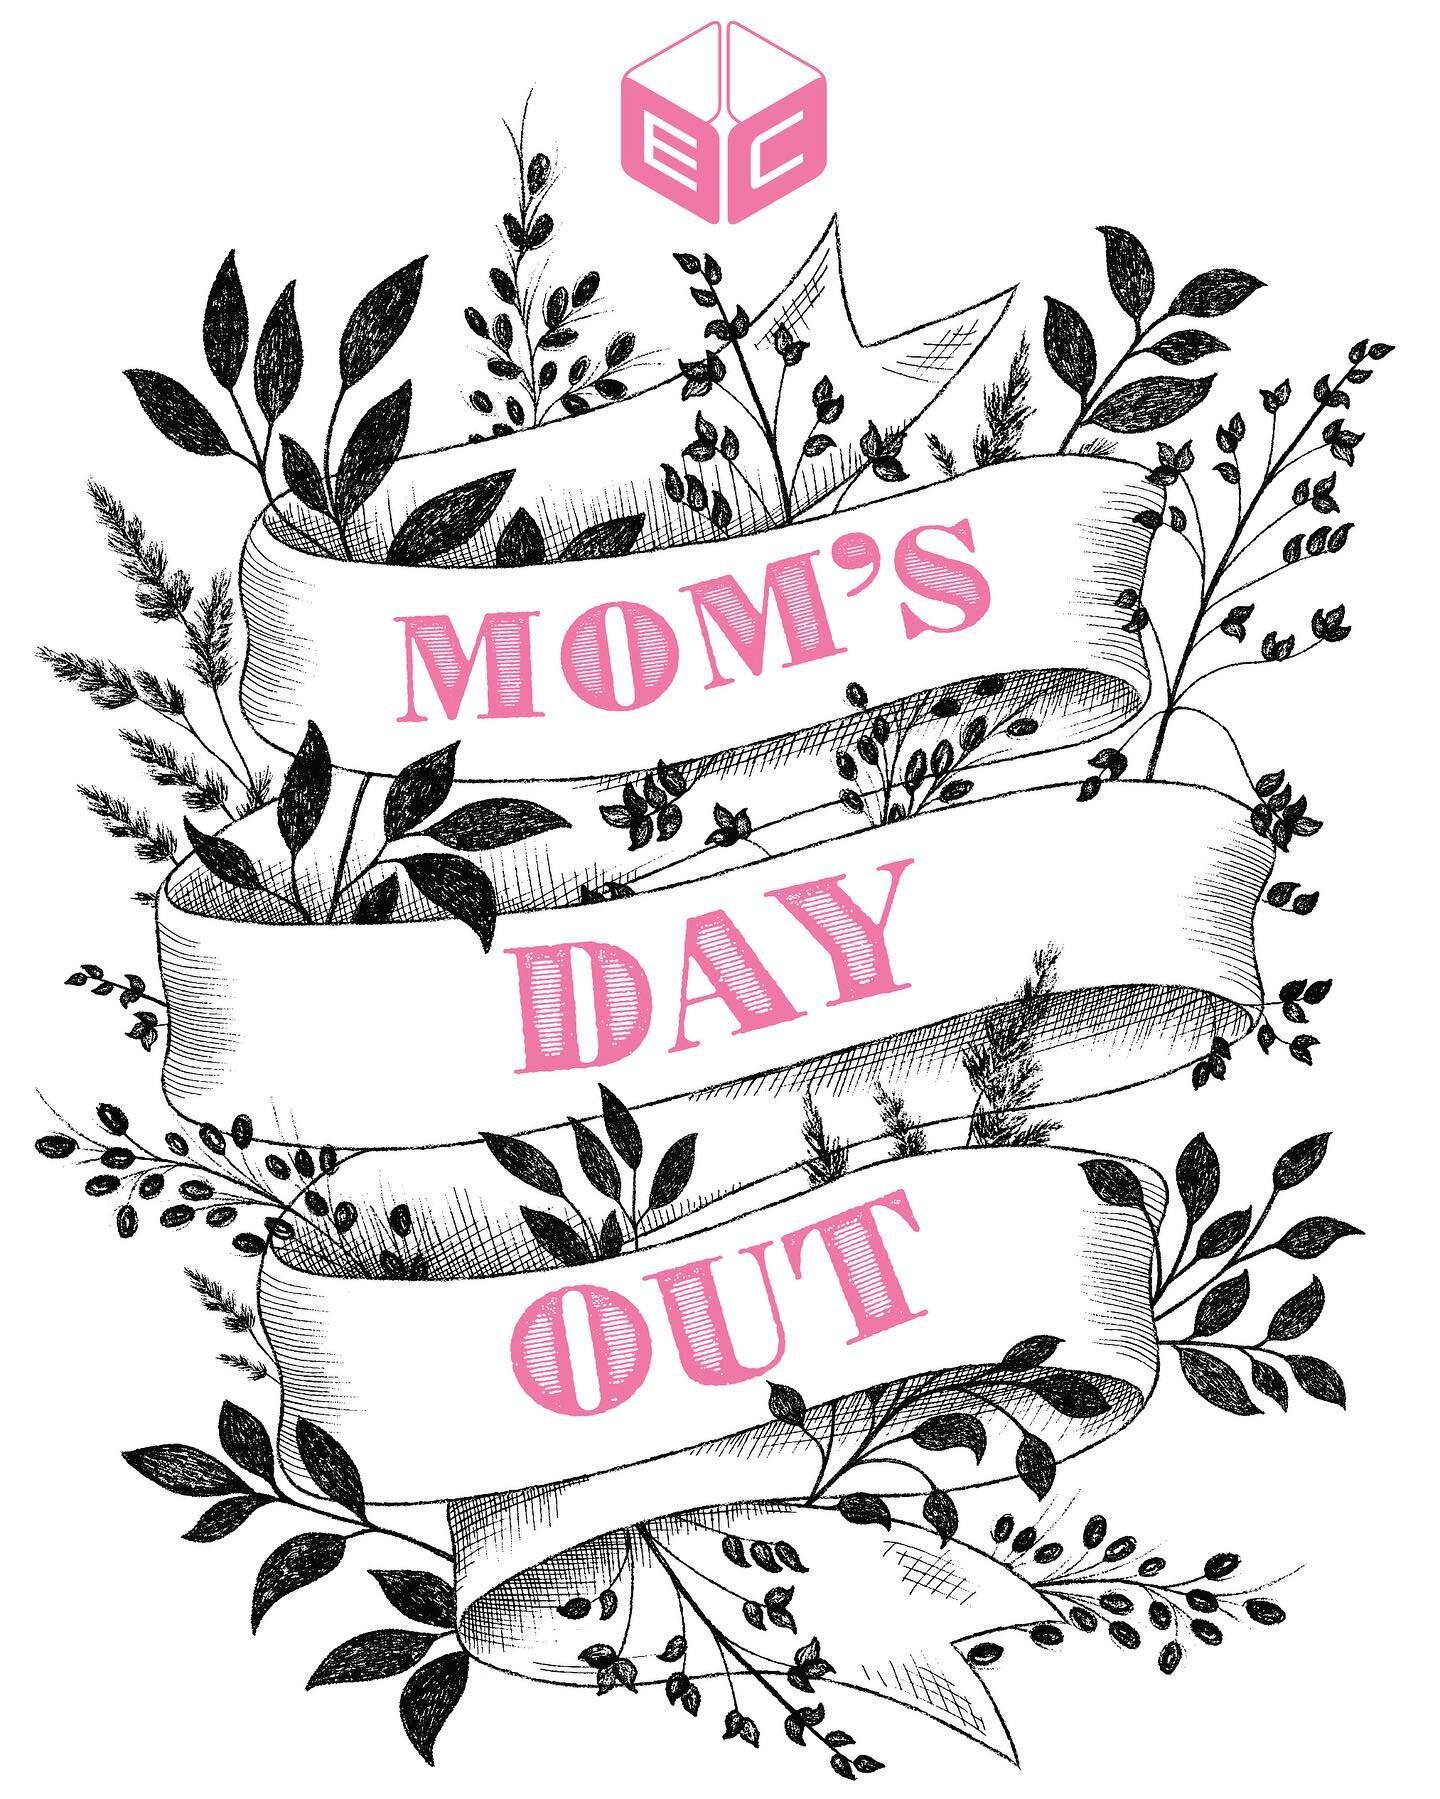 Grab your besties and take an afternoon to treat yourself at our first annual Mom's Day Out at The Empty Corner! We will have pampering, shopping, treats and more at this fun BYOB event, you won't want to miss it! Join Kristie from @gouda_and_ganache